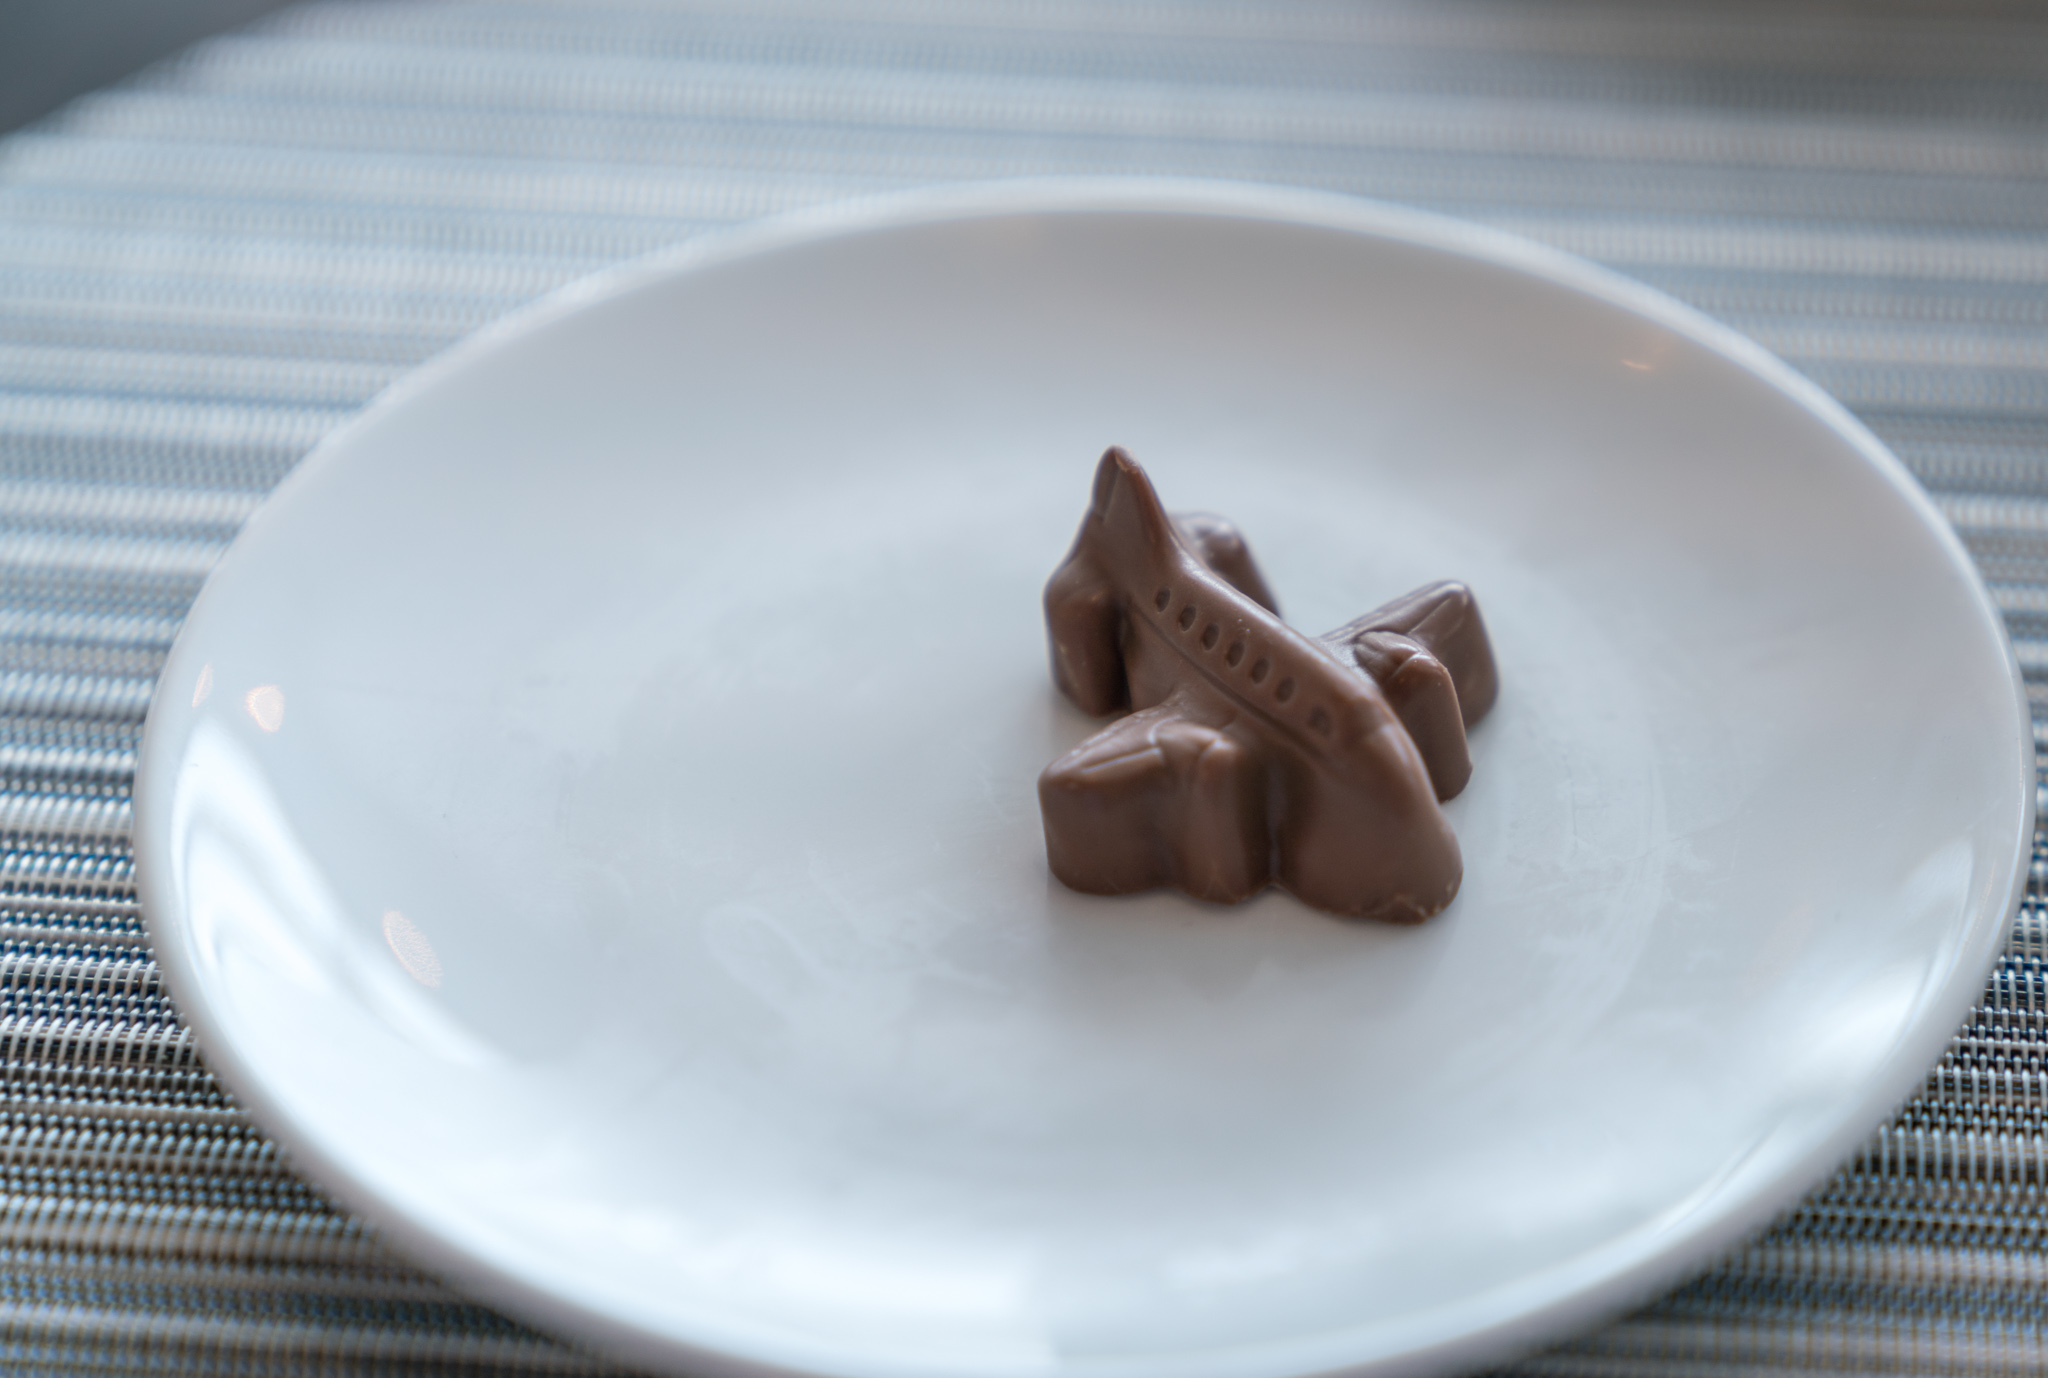 a chocolate airplane shaped object on a white plate